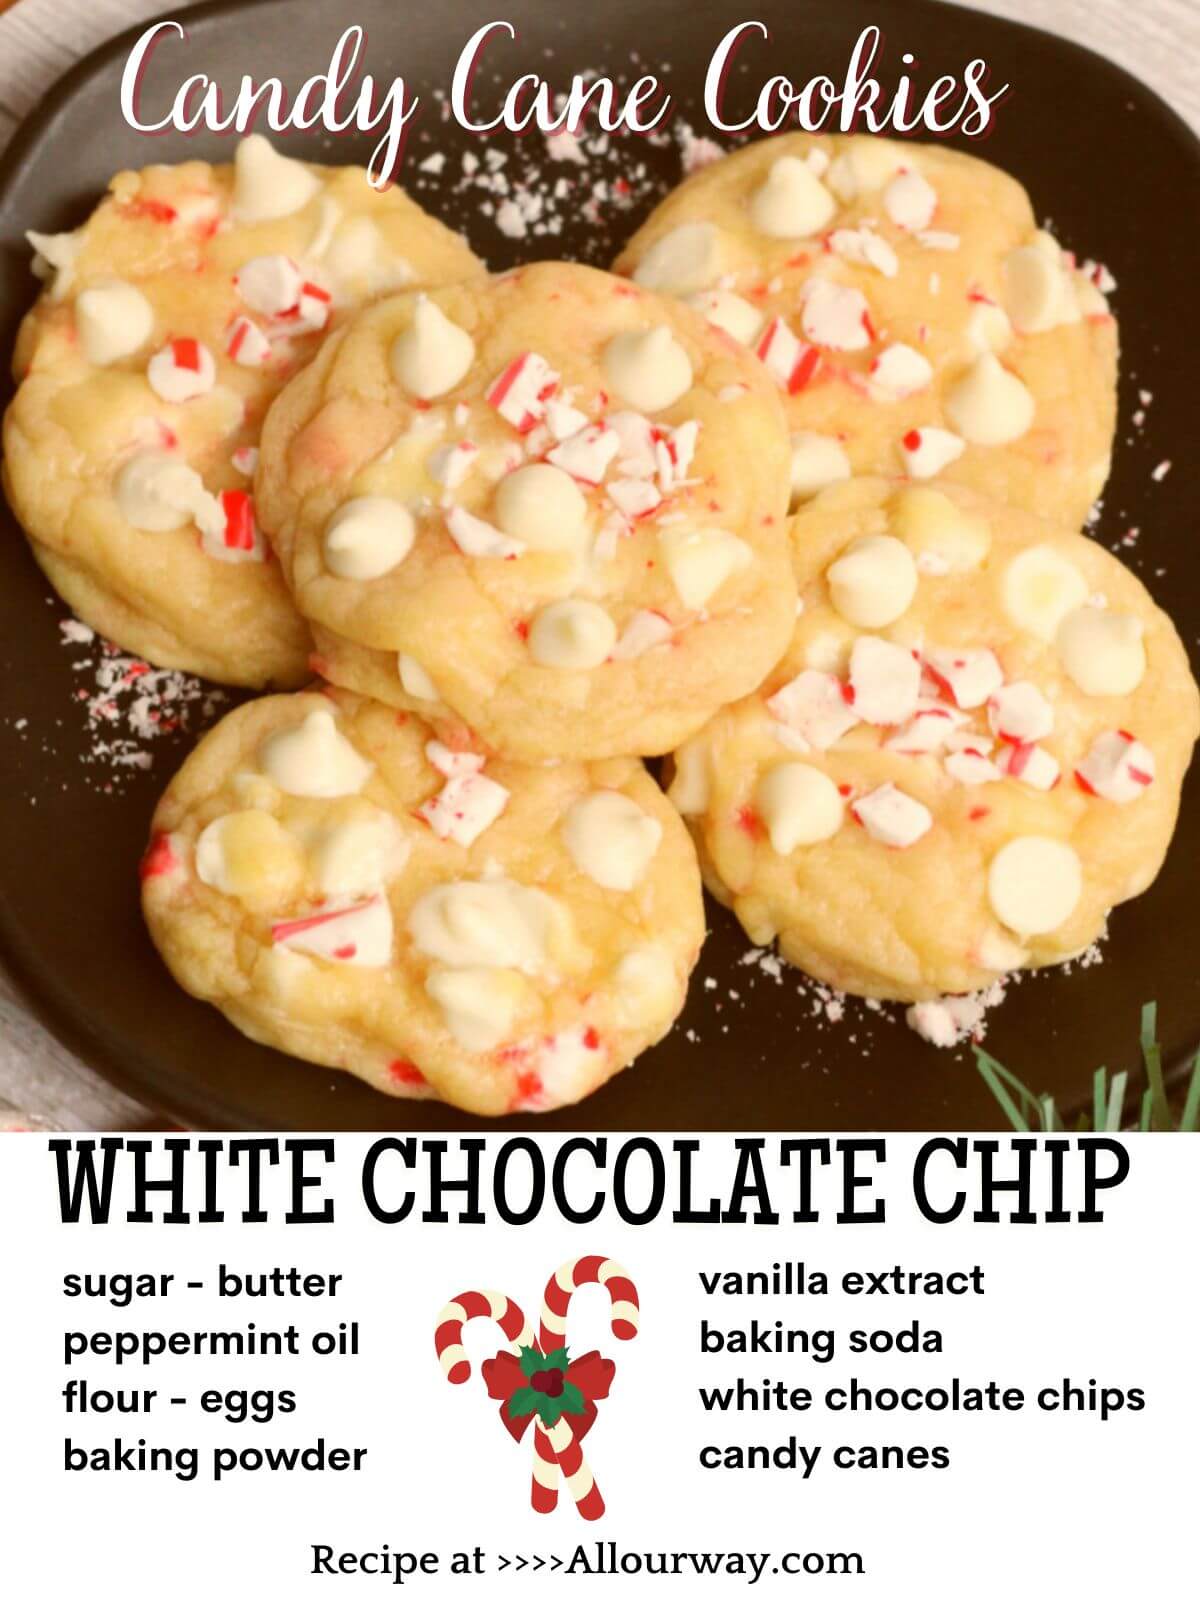 These festive White Chocolate Chip cookies are perfect for any holiday gathering or just for enjoying at home with family and friends. The combination of peppermint and white chocolate is irresistible, and the addition of crushed candy canes gives them a beautiful holiday look.